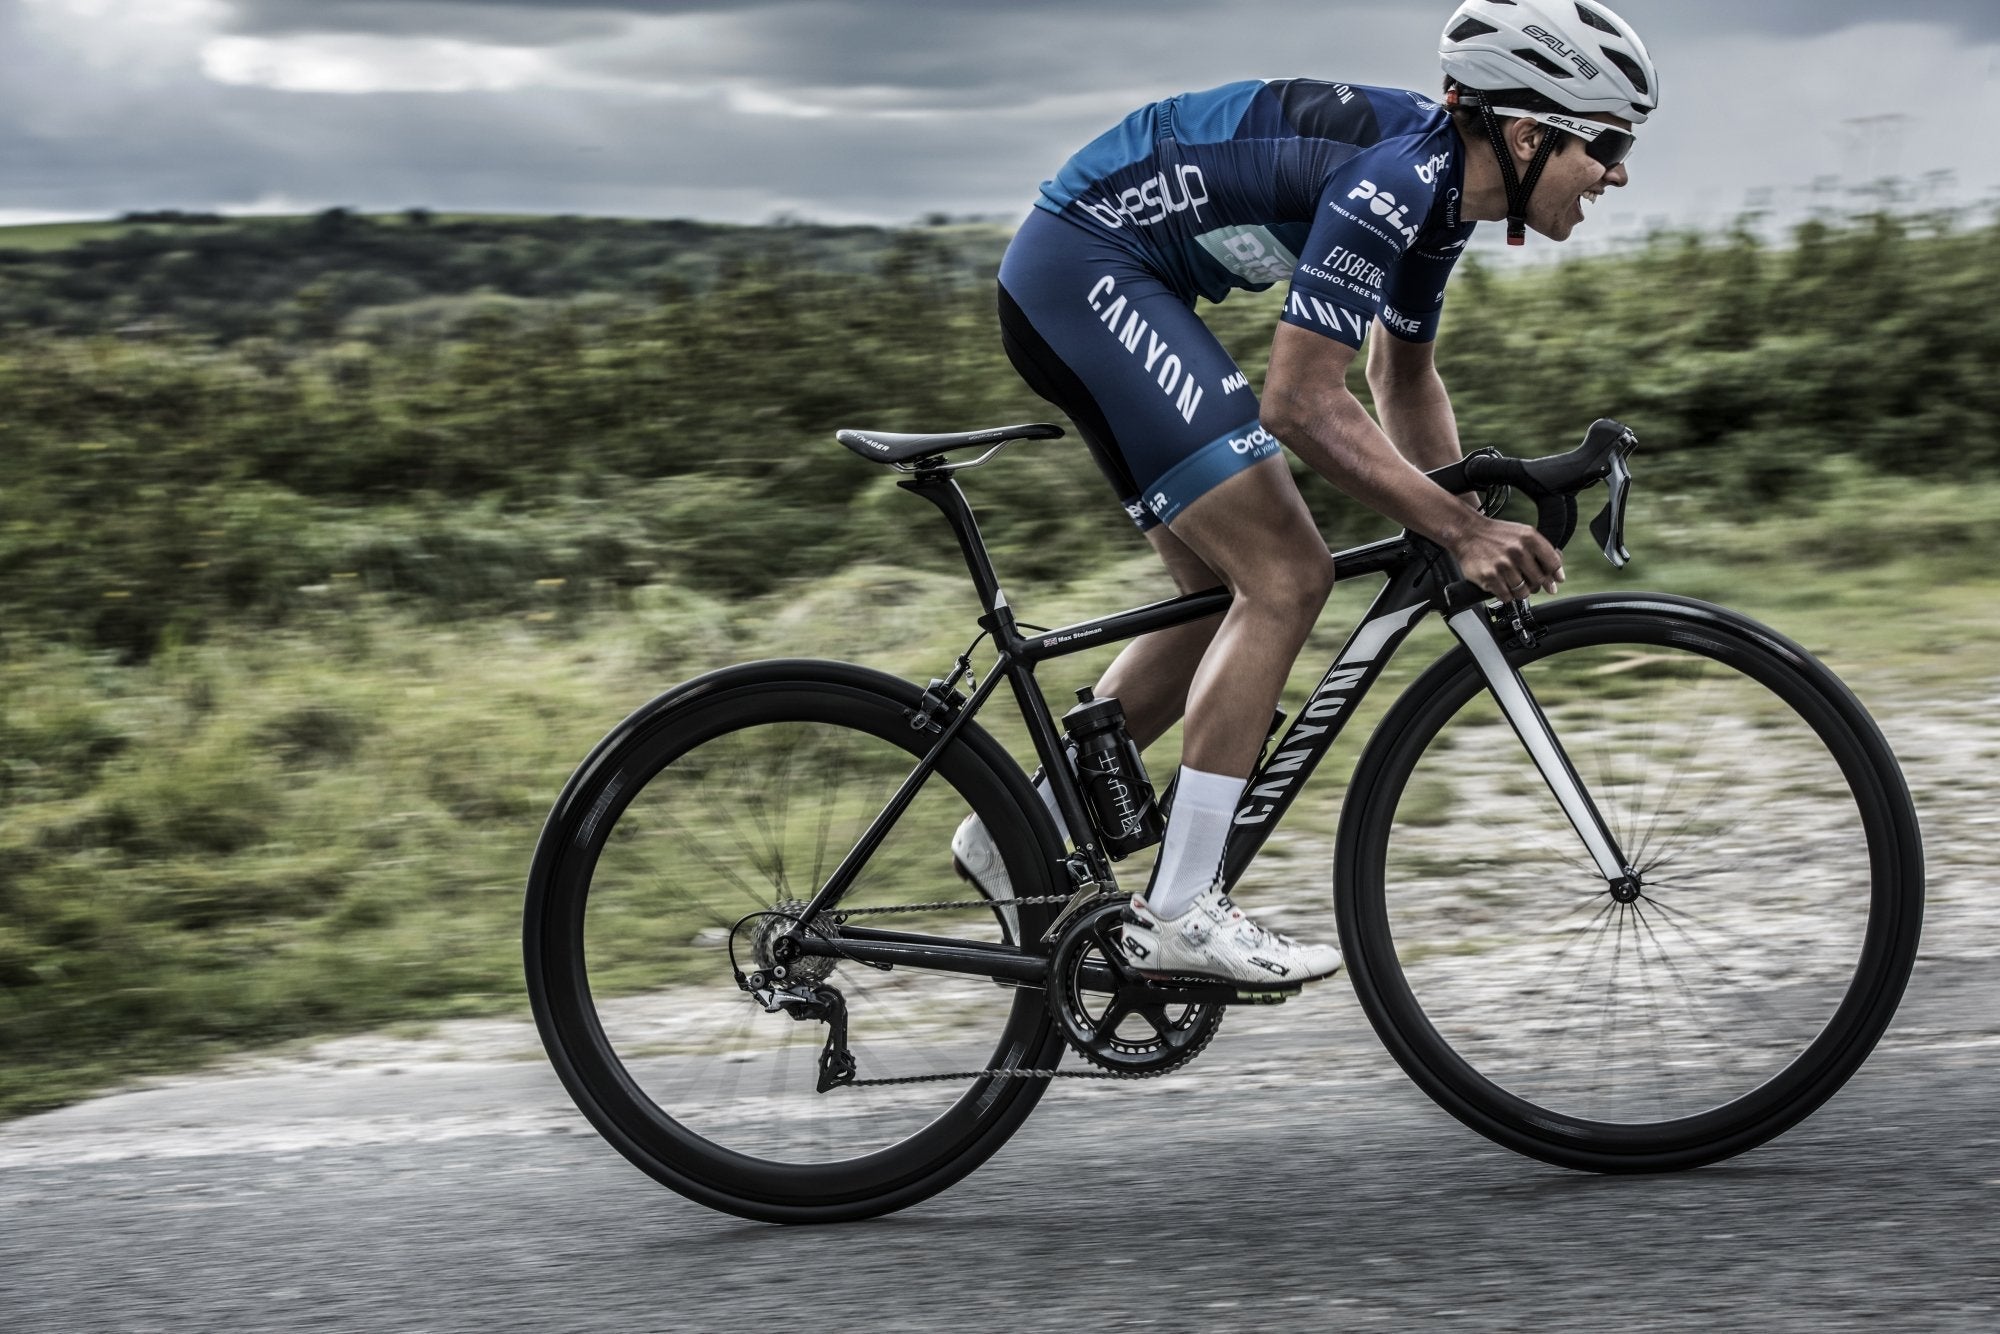 <h1>Weight</h1><i>The consequence of the fanatical attention to detail is an outstandingly light 1417g wheelset weight in a lightning fast stiff aero package. We've enjoyed free wheeling in the pack whilst all others are pedalling, is it cheating?</i>